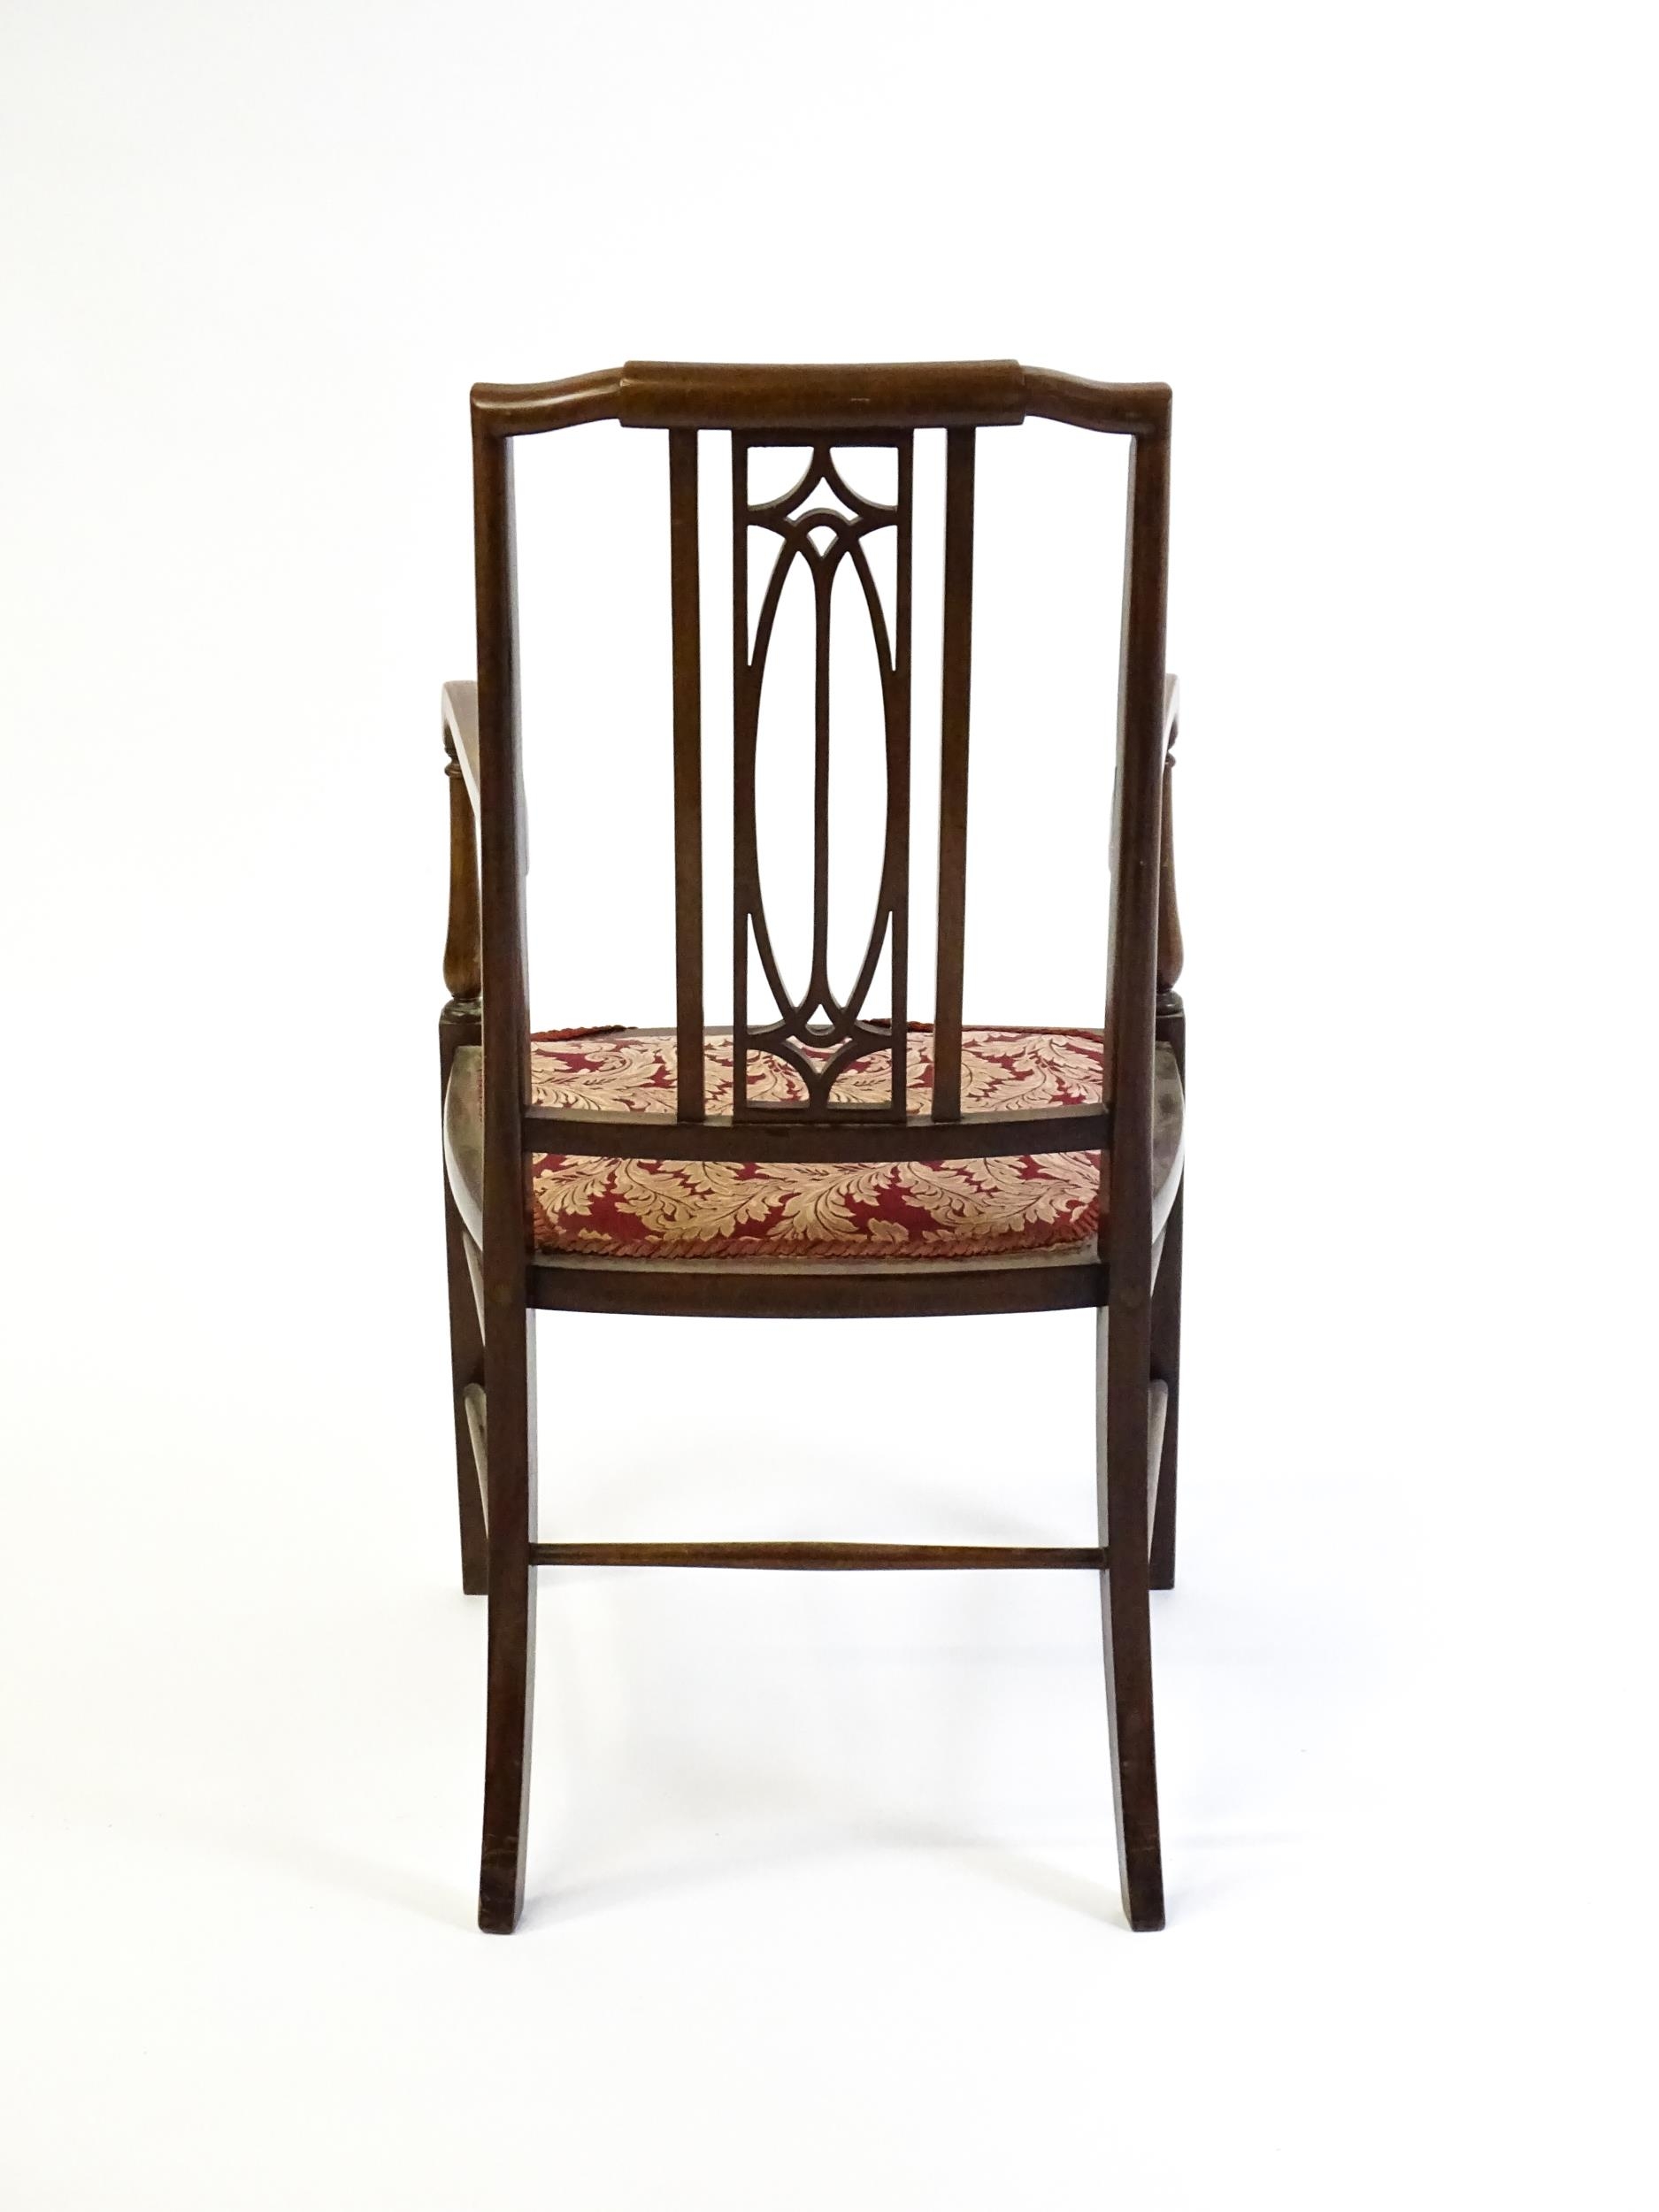 An Edwardian elbow chair with a burr walnut veneered top rail, a pierced back splat and swept arms - Image 2 of 5